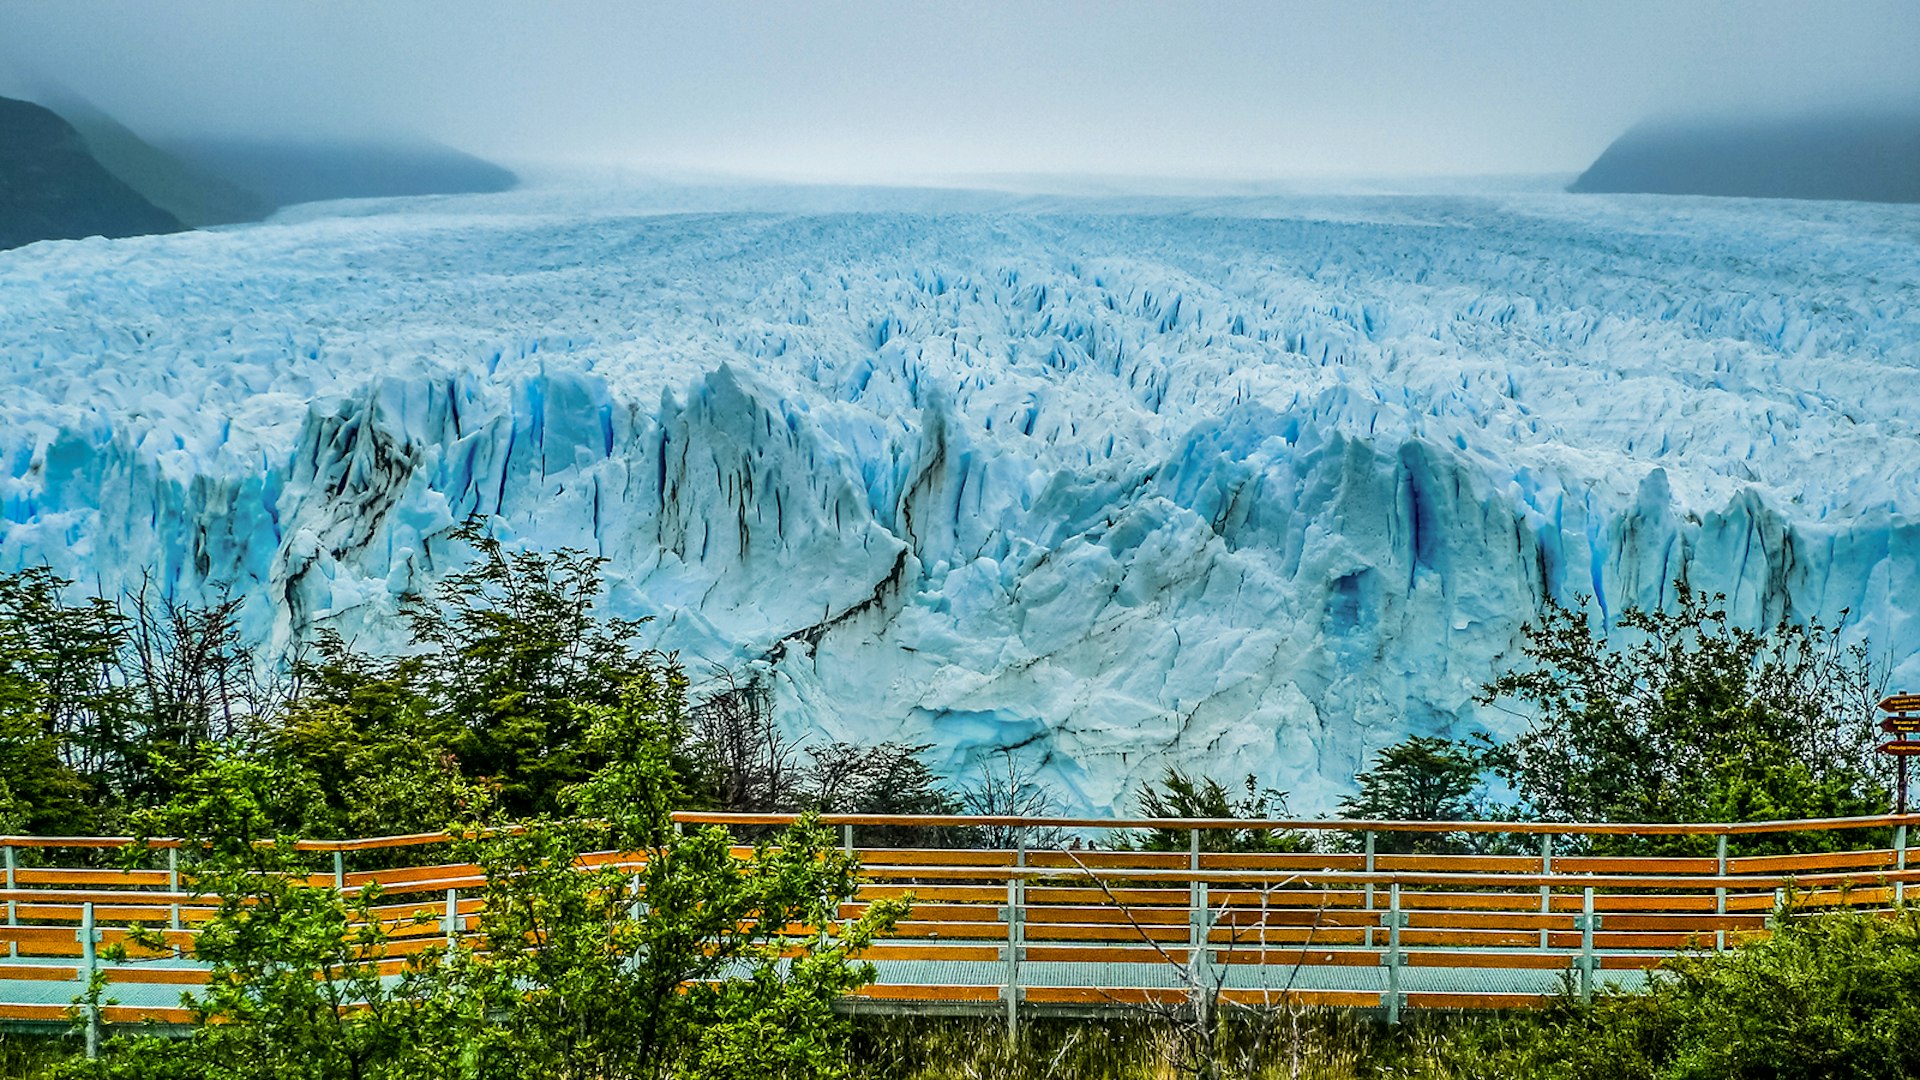 A waking bridge stretches along the front of the sheer, light blue face of Perito Moreno Glacier. Mist cloaks the hills to either side. Patagonia, Argentina.